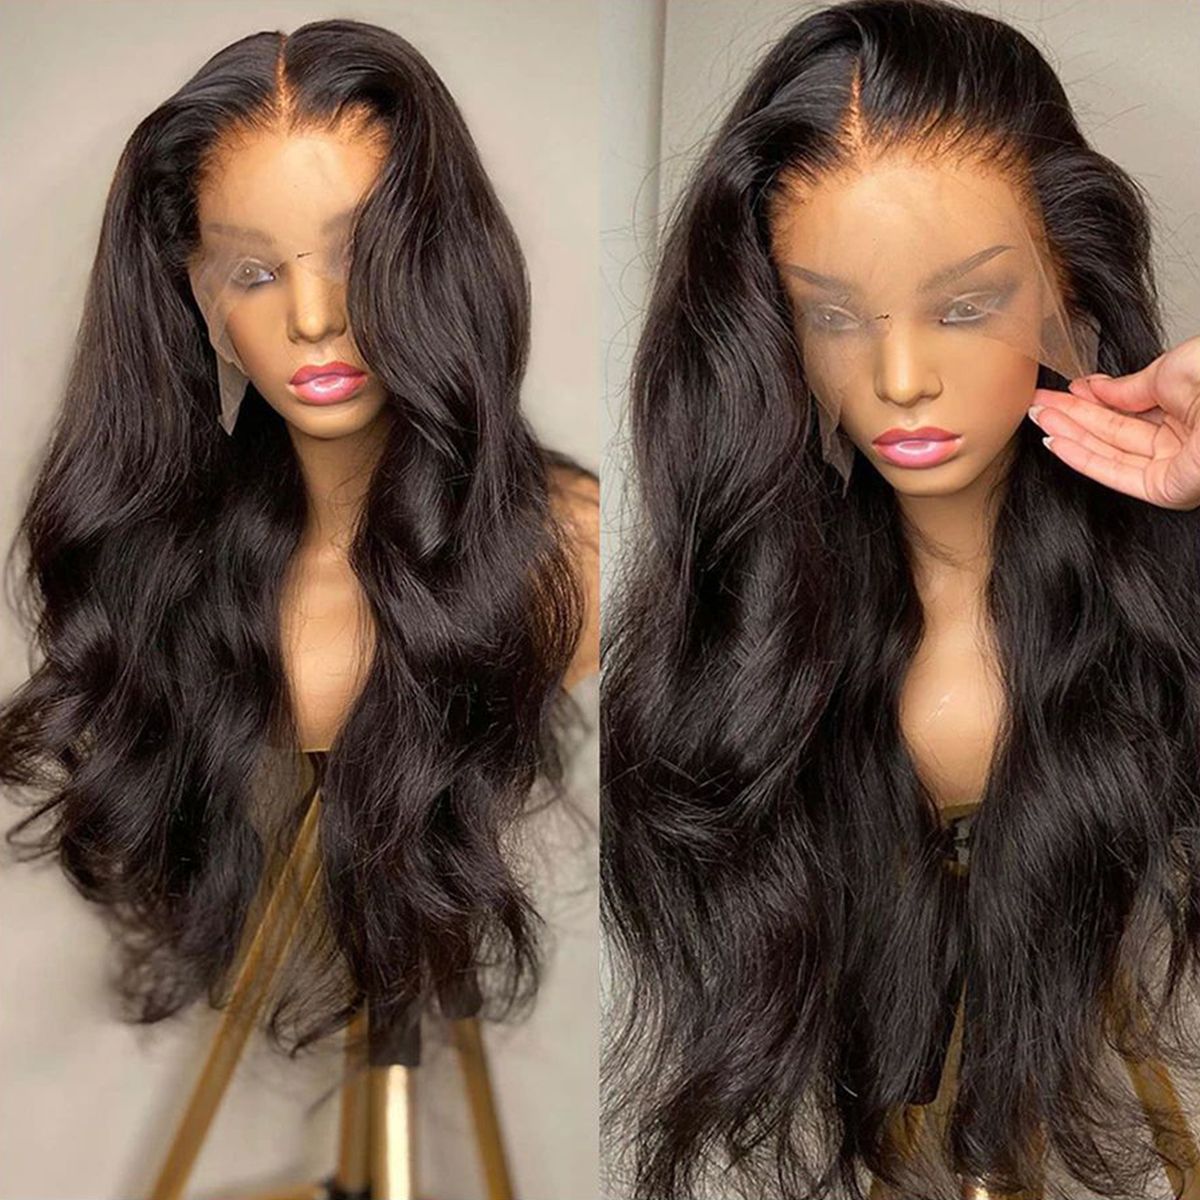 Long body wave lace front wig (4)